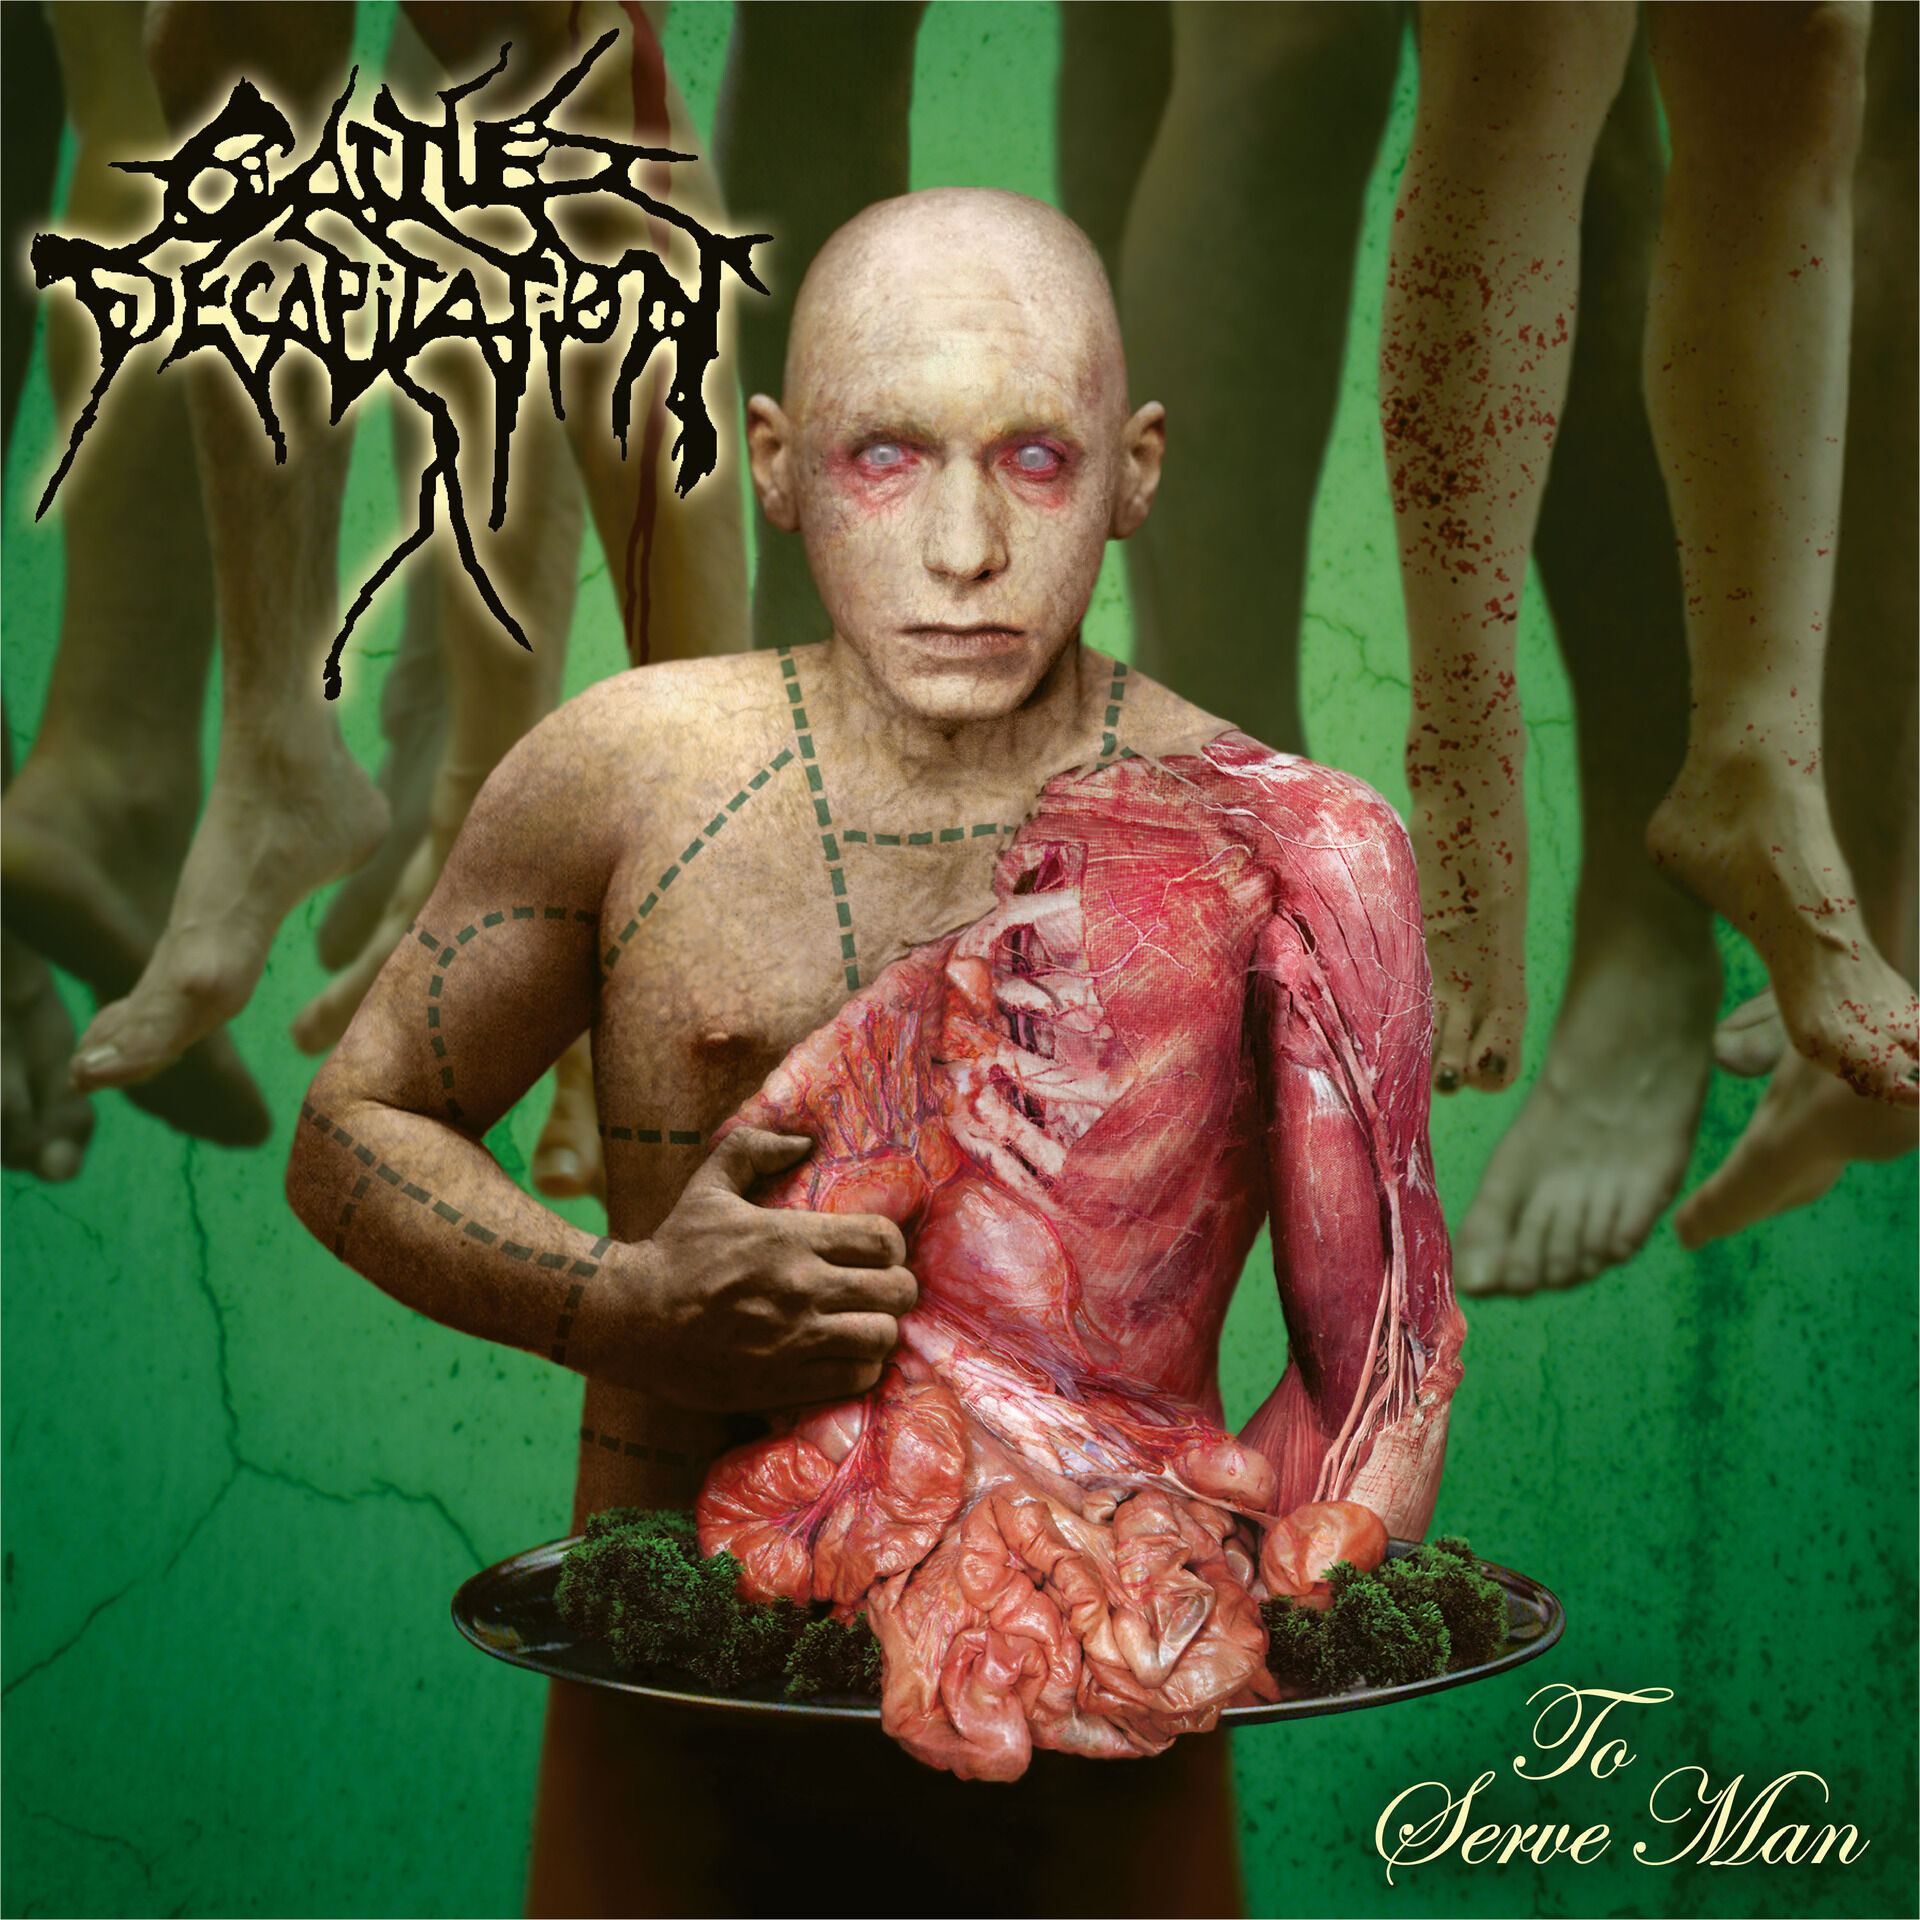 CATTLE DECAPITATION - To Serve Man [CD]